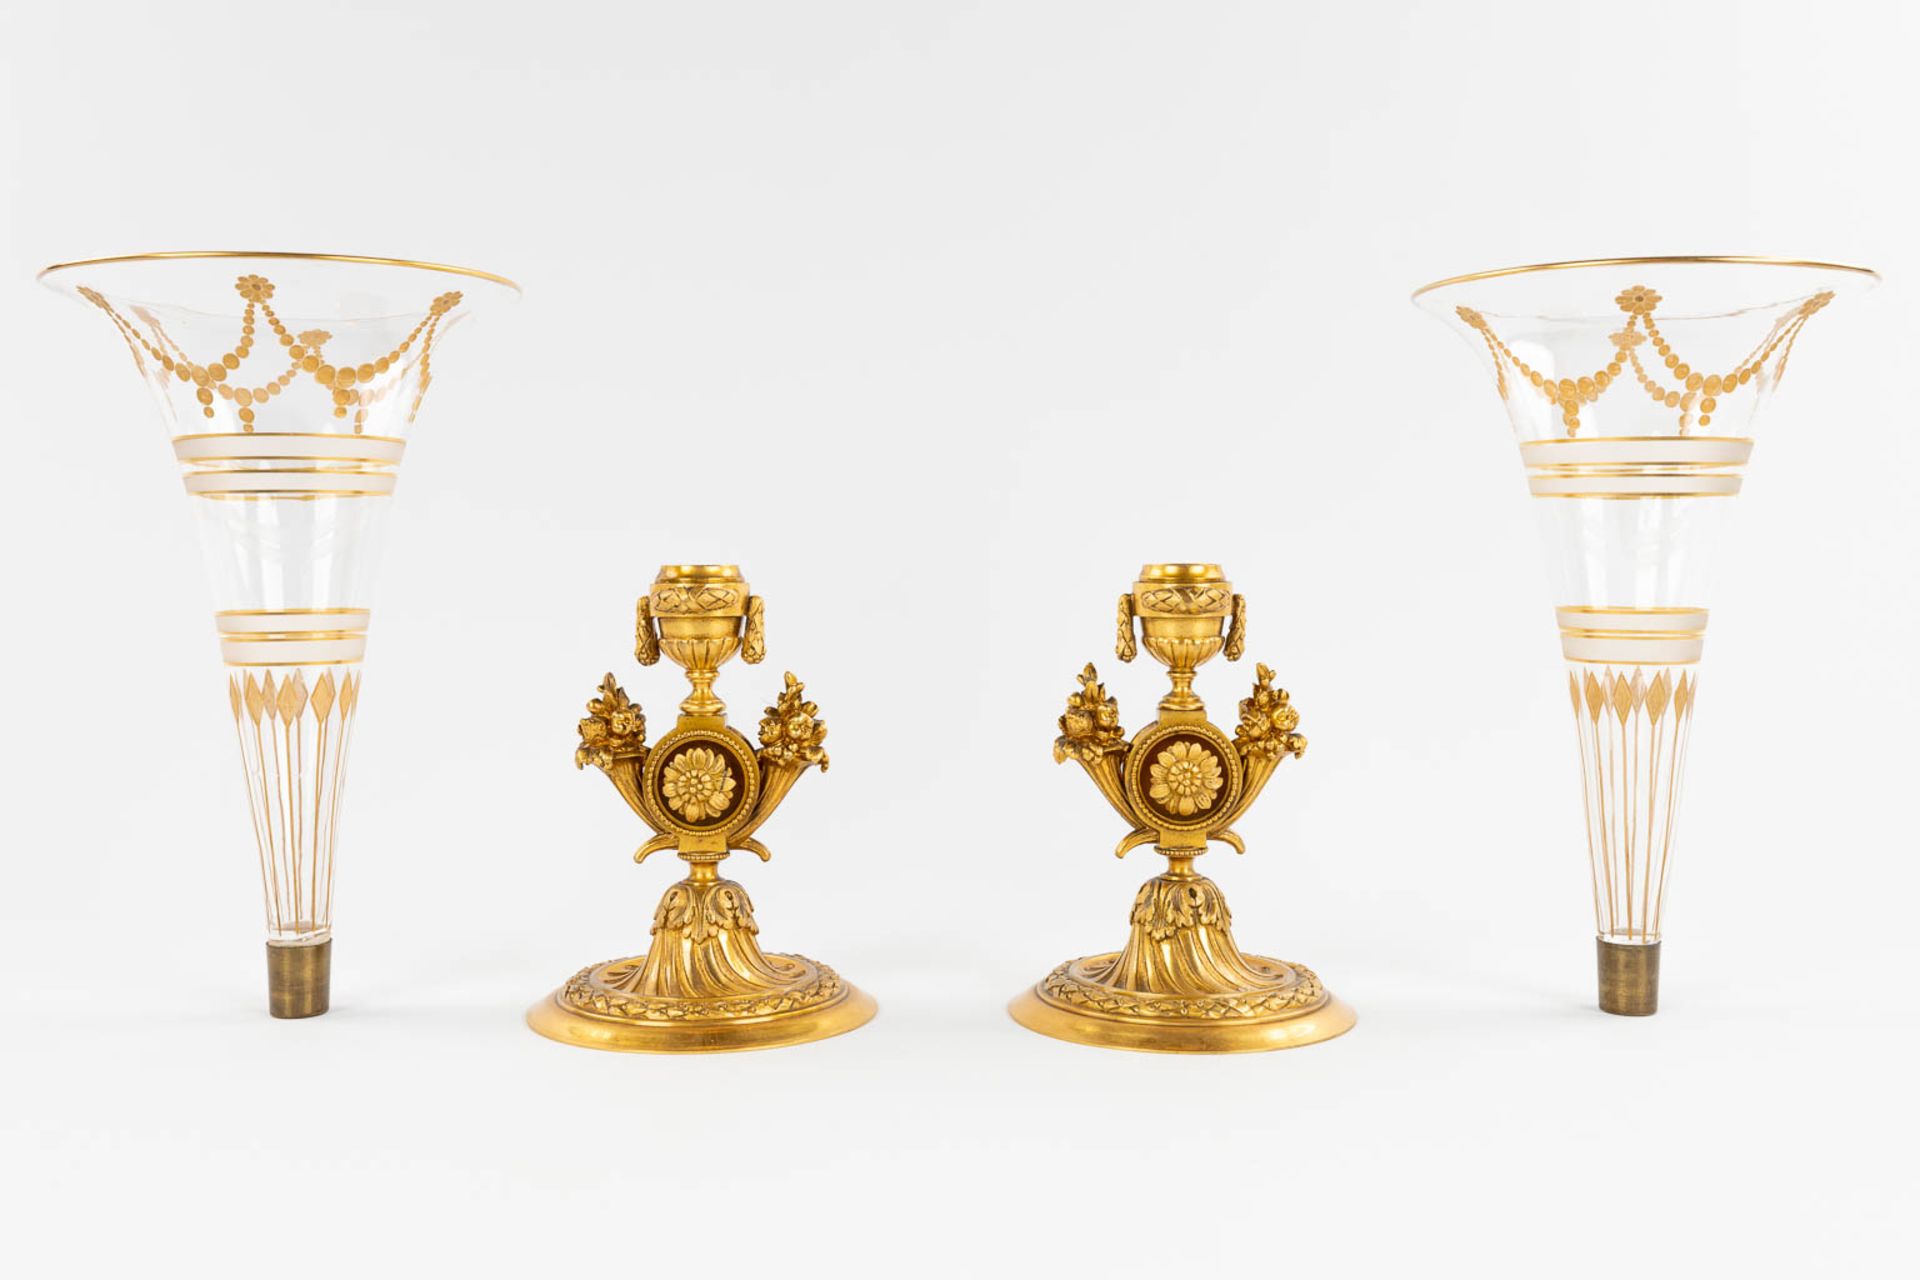 A pair of trumpet vases, gilt bronze and glass in Louis XVI style. 19th C. (H:31,5 x D:13 cm) - Image 6 of 13